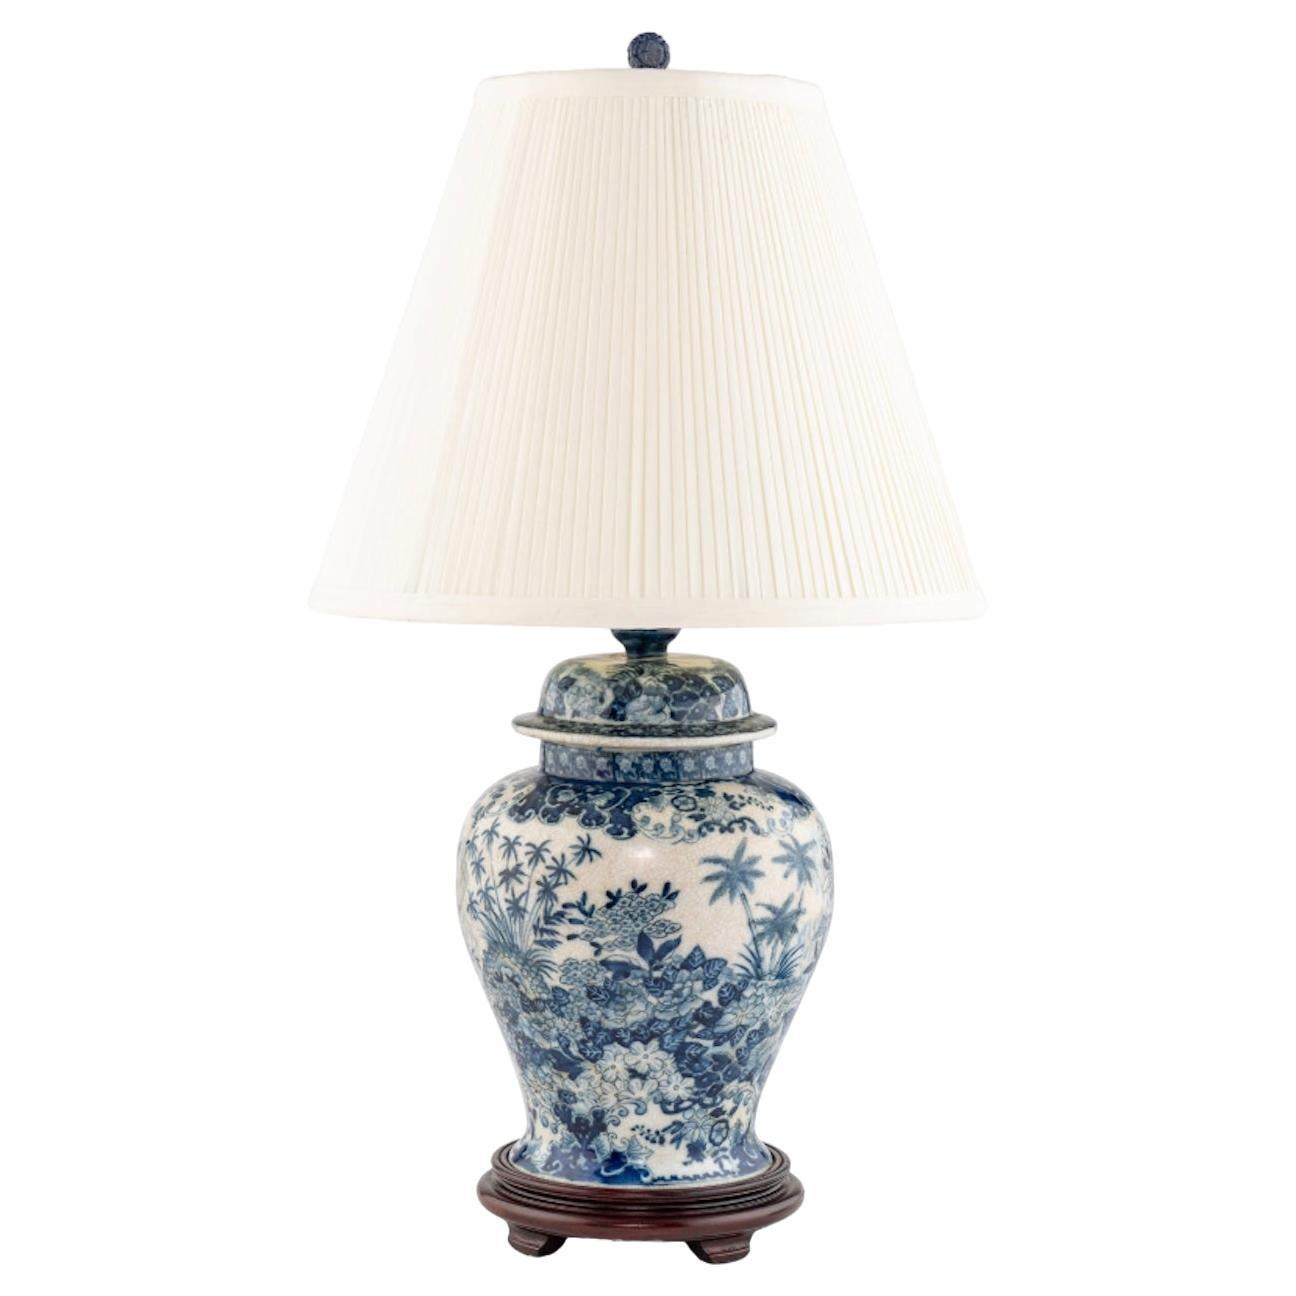 A Blue and White Porcelain Lamp 20th Century Height 25 1/2 inches.